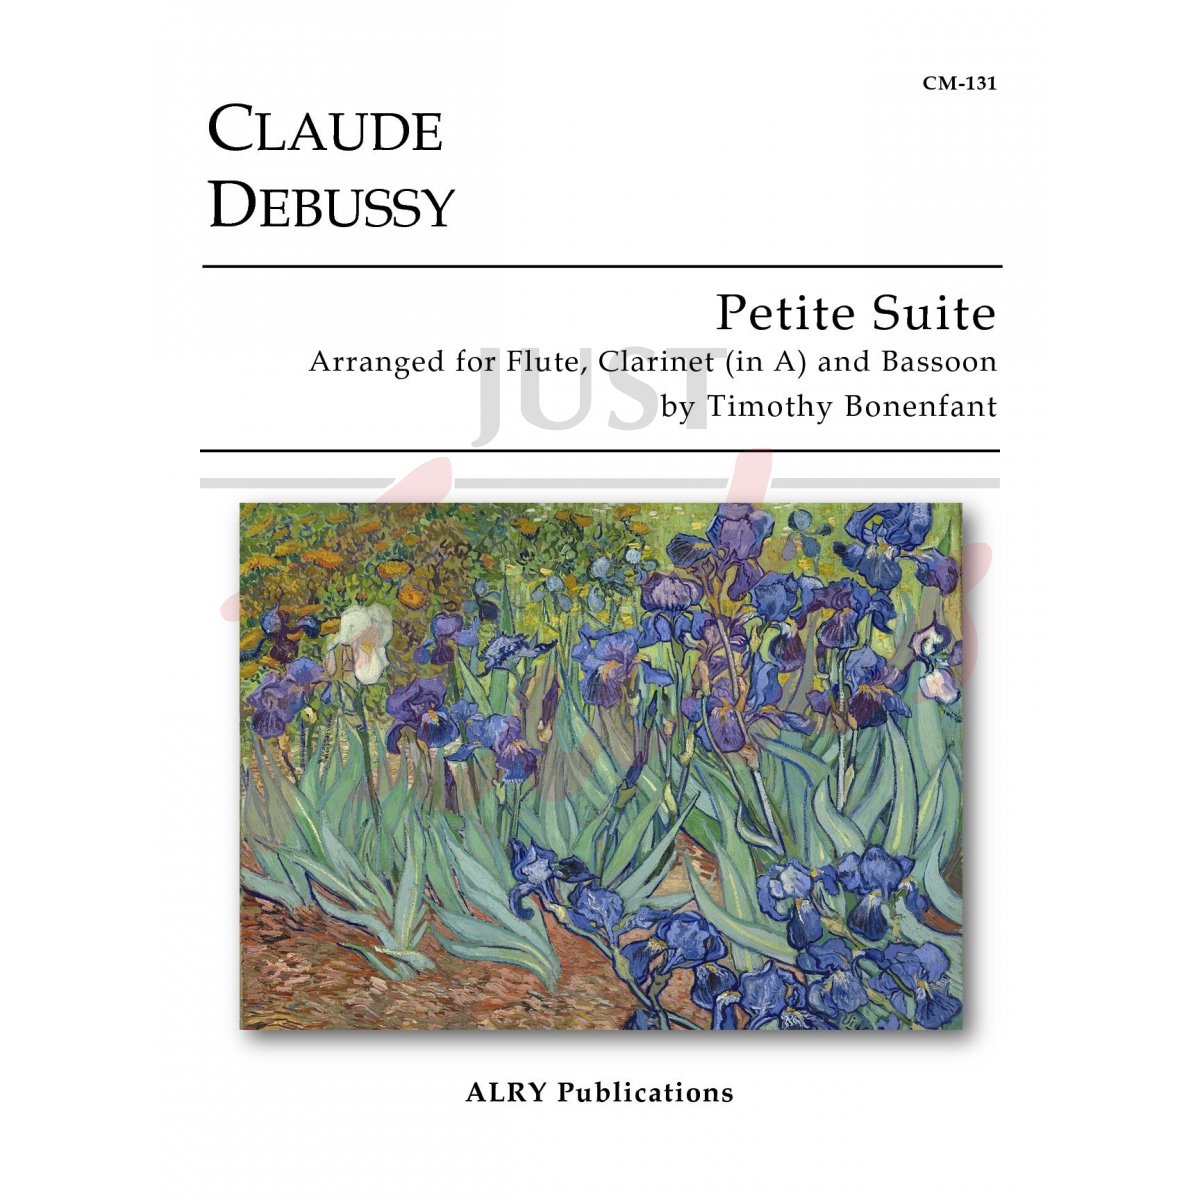 Petite Suite for Flute, Clarinet in A and Bassoon